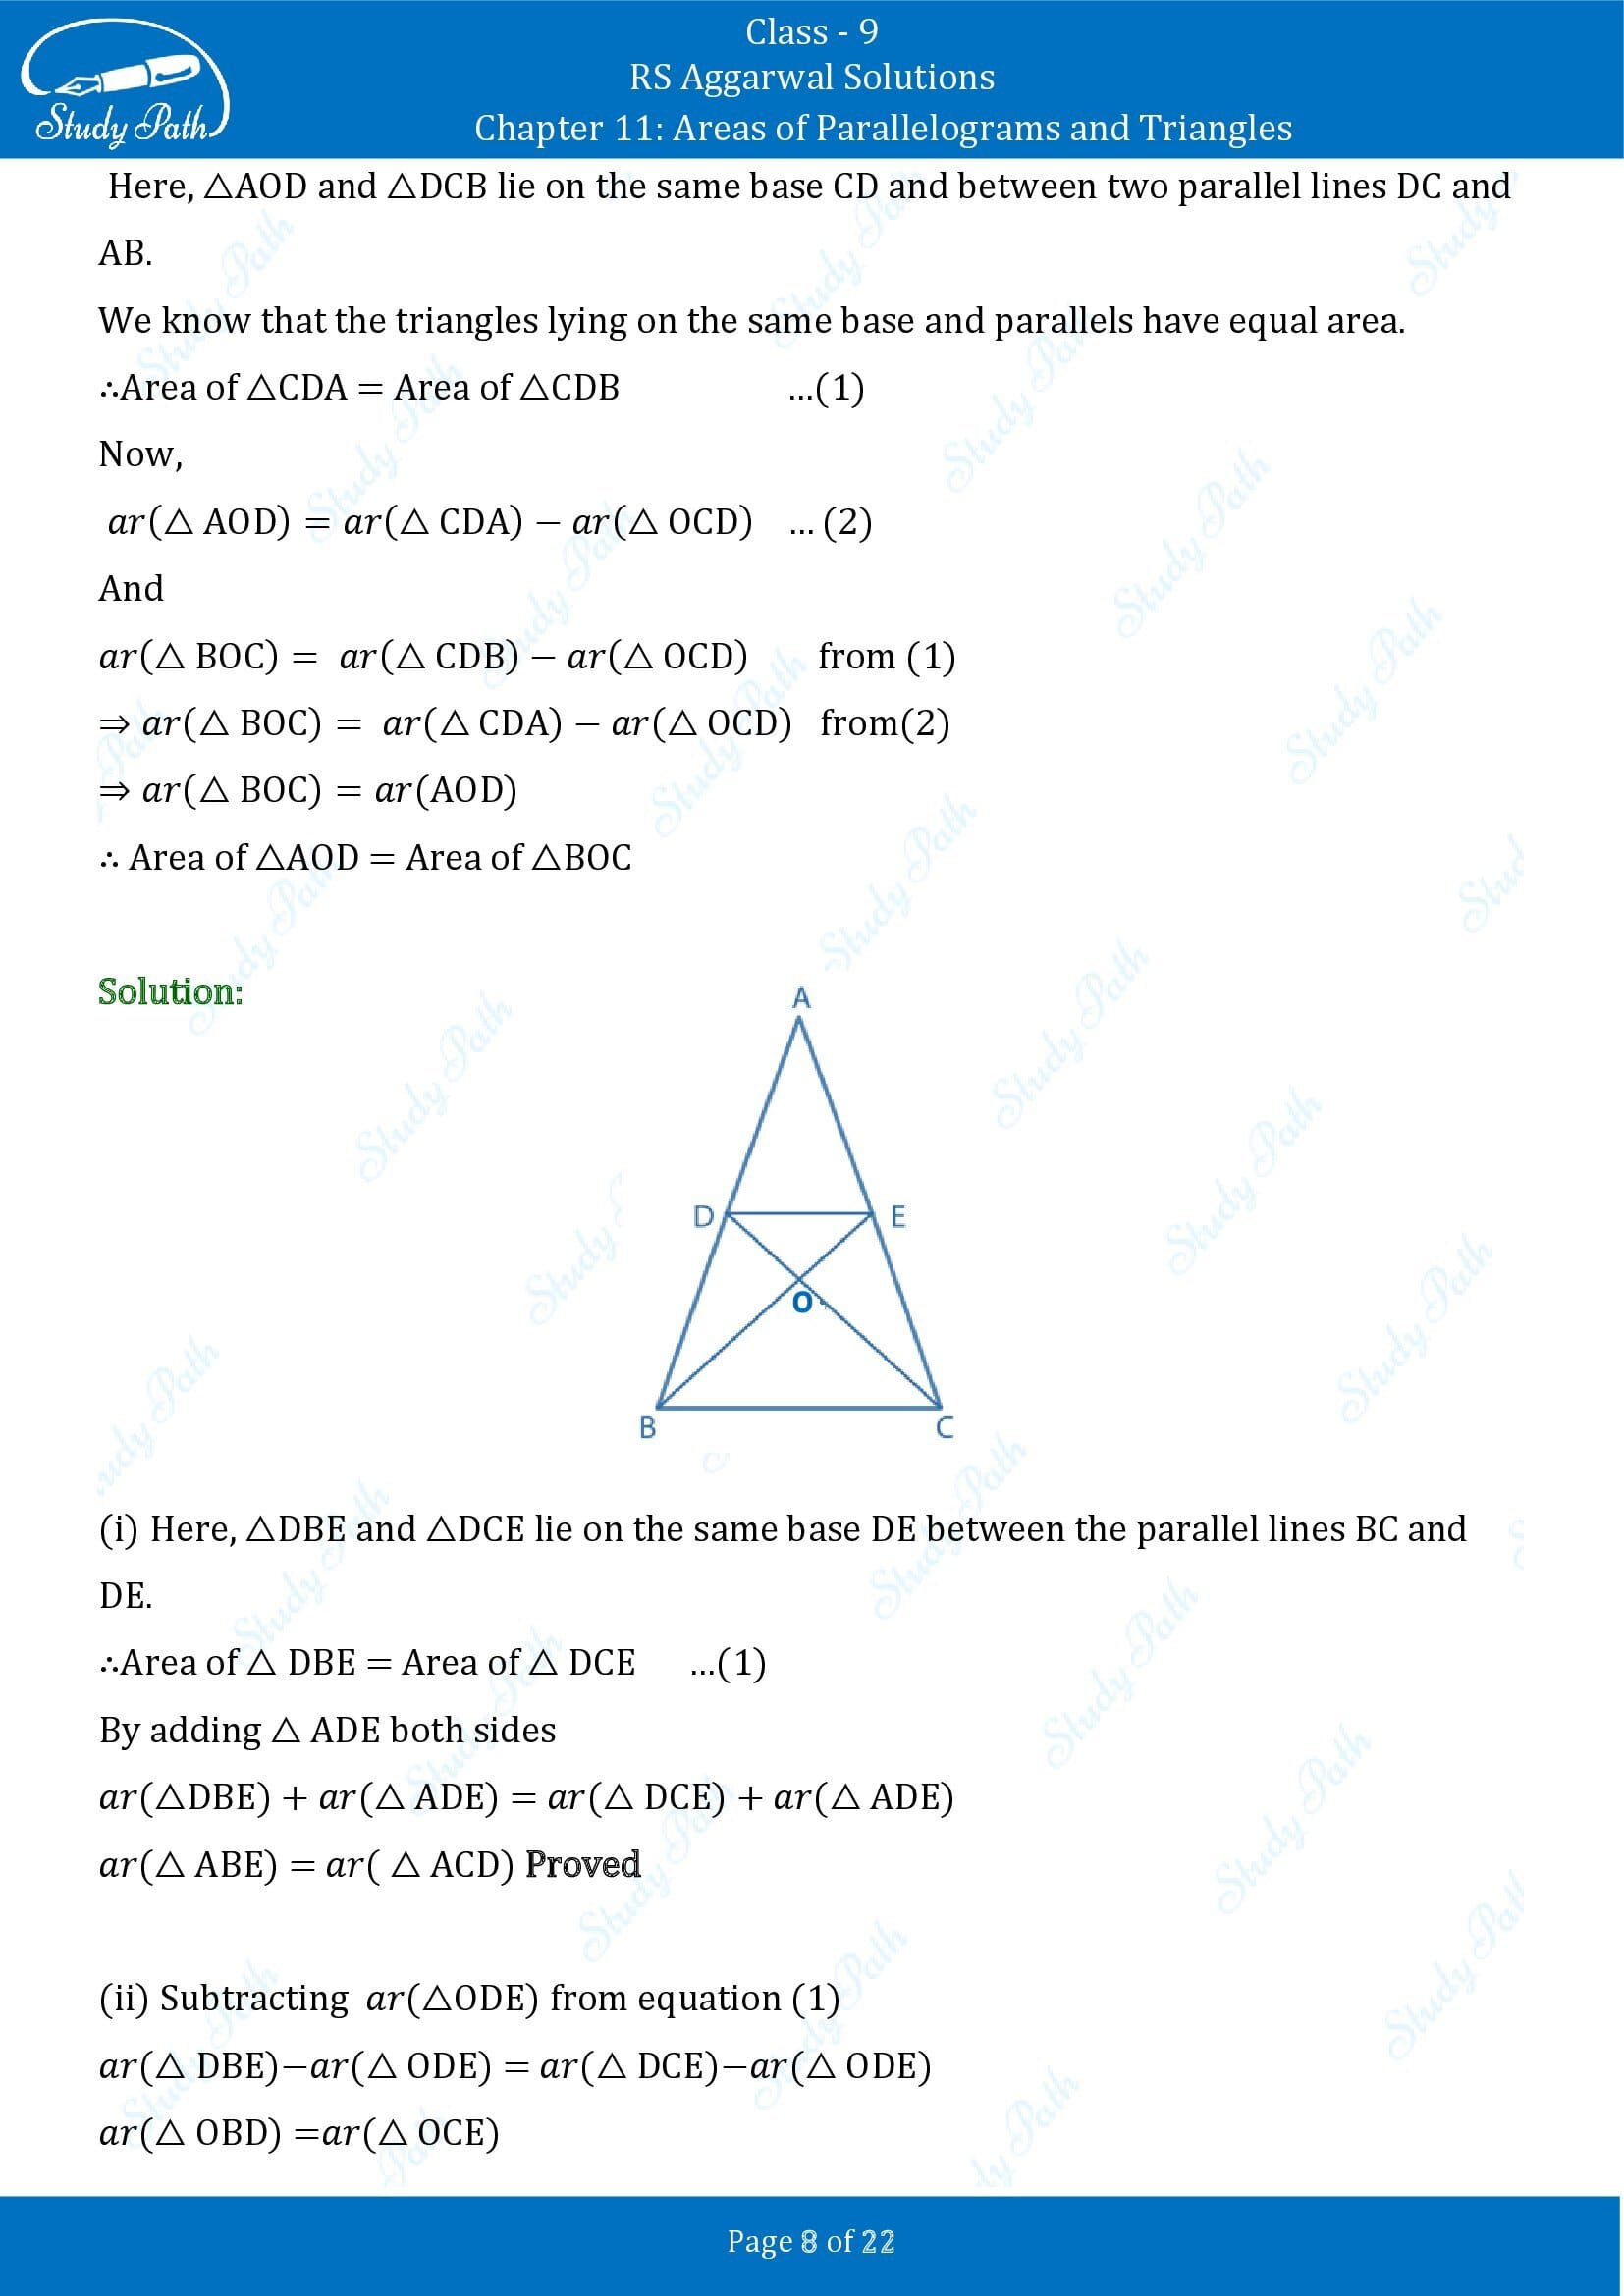 RS Aggarwal Solutions Class 9 Chapter 11 Areas of Parallelograms and Triangles Exercise 11 00008